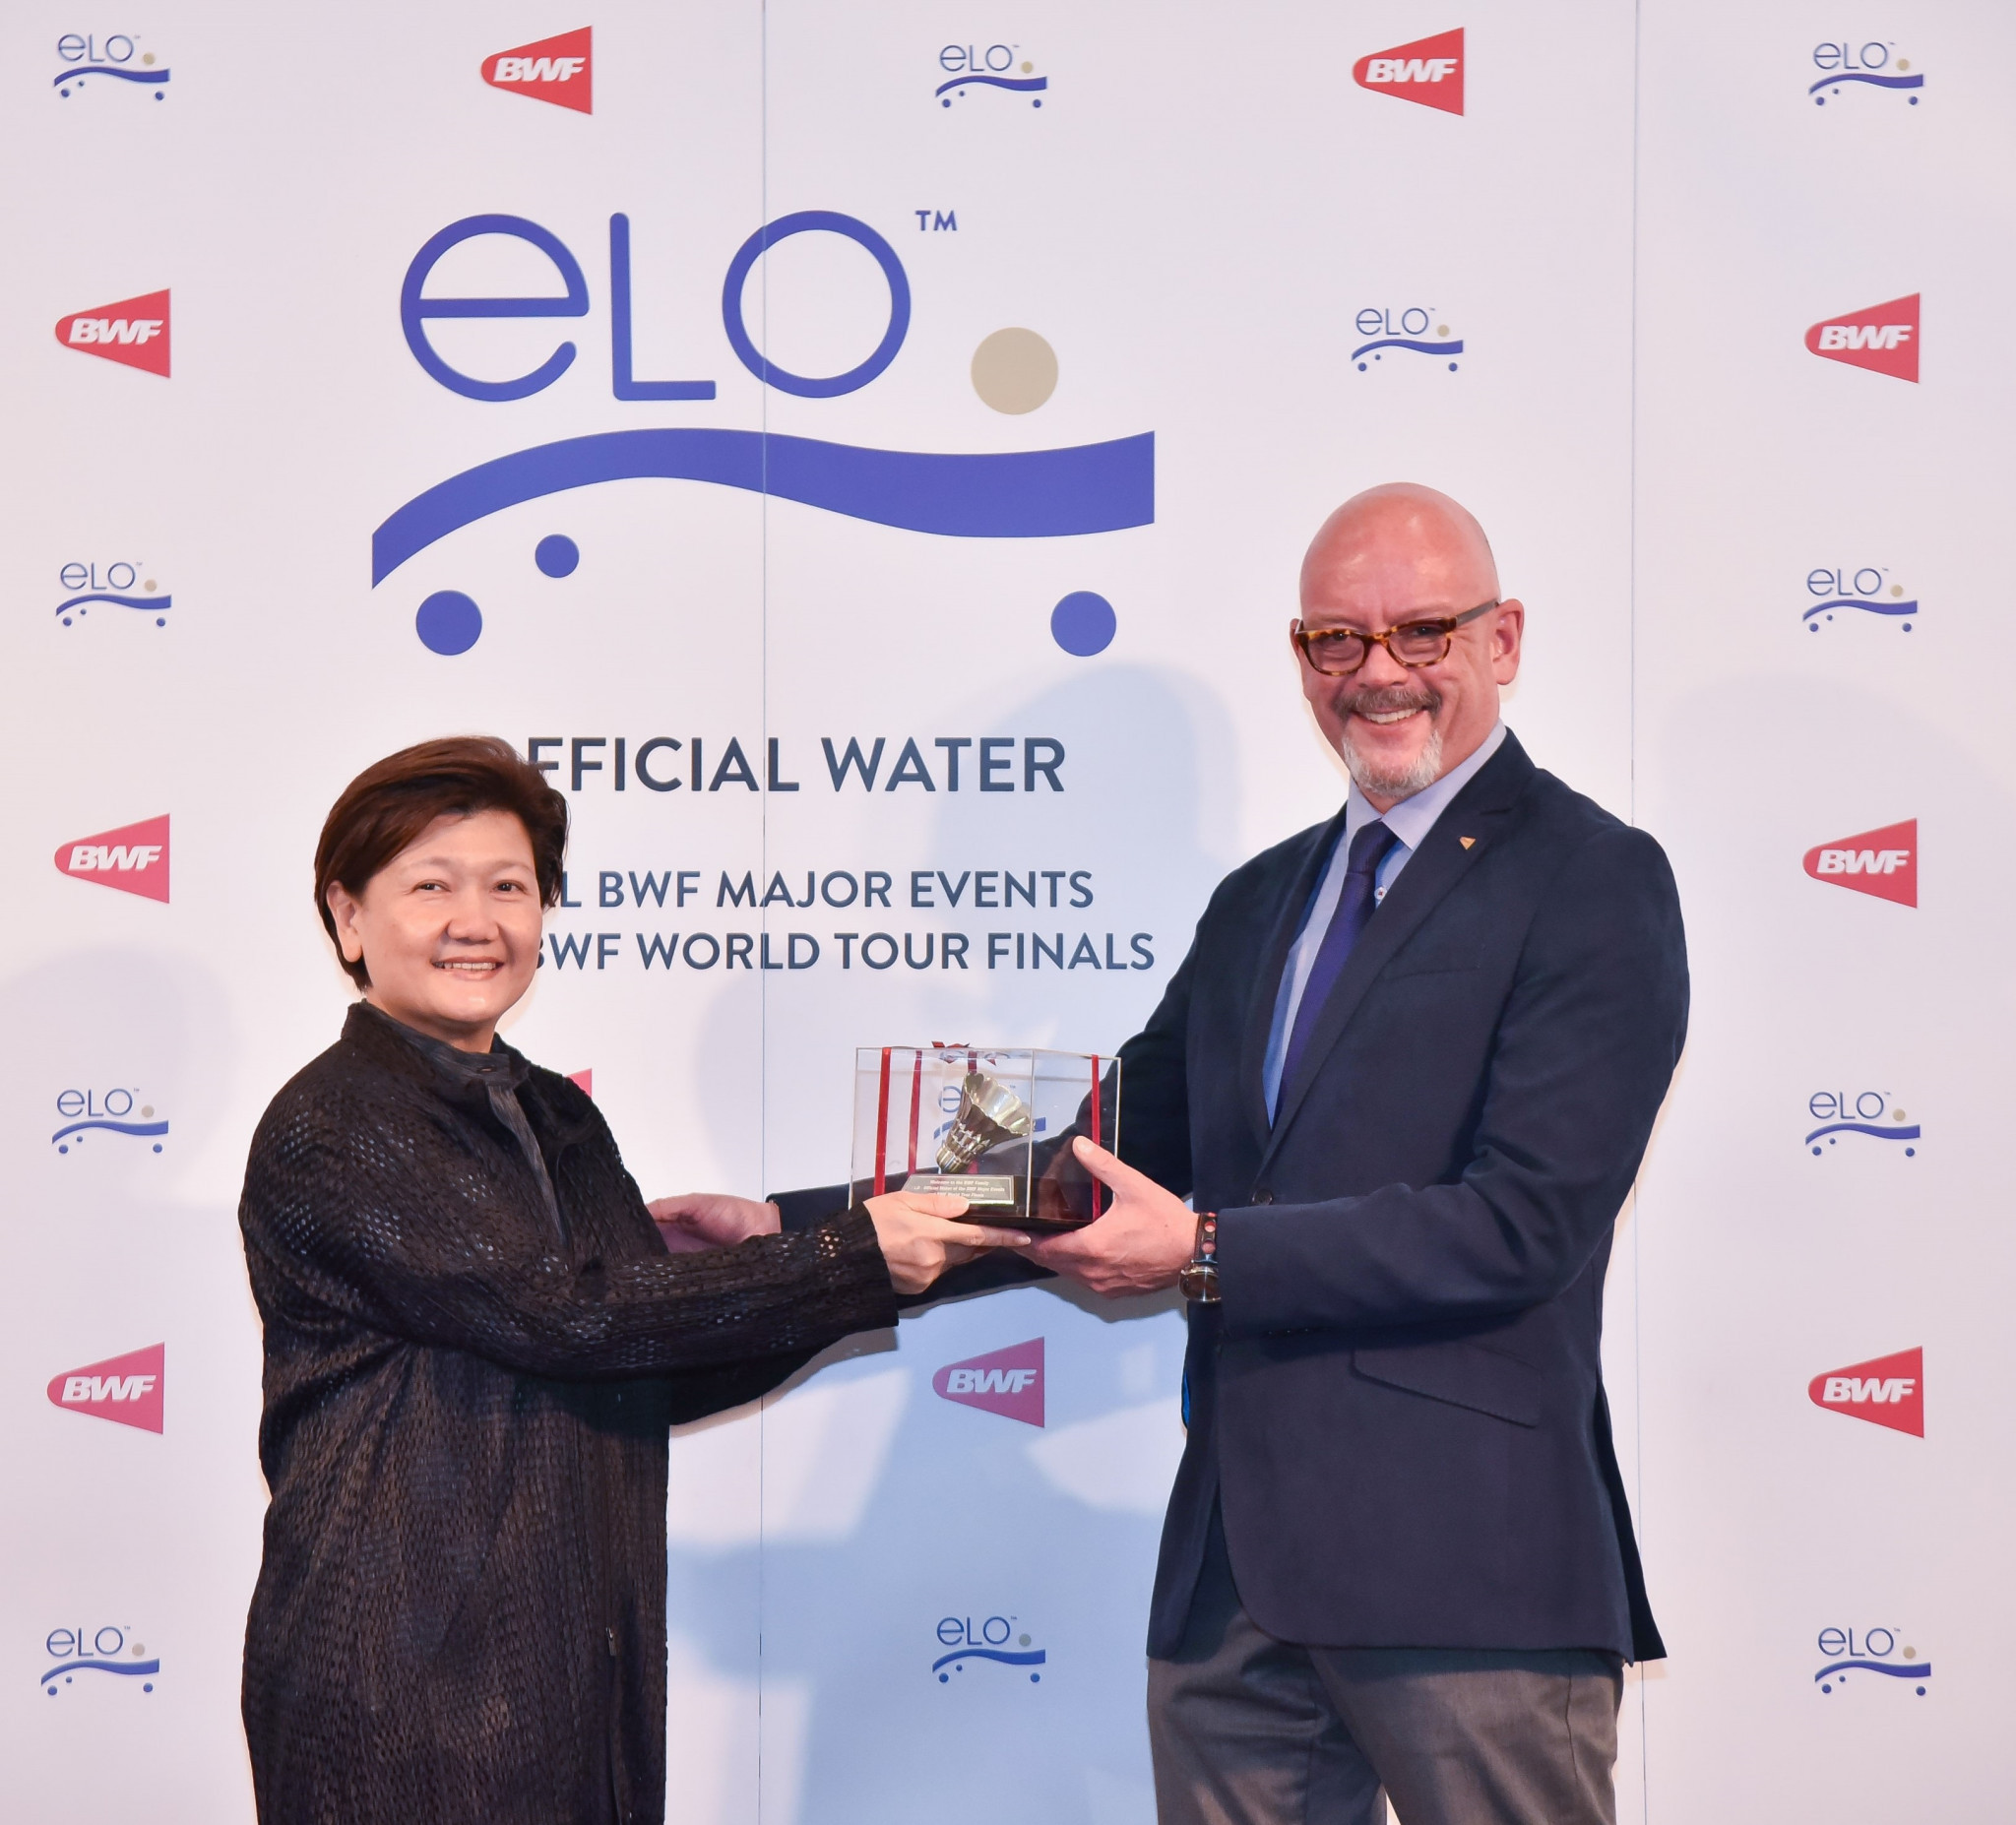 The Badminton World Federation has unveiled ELO Water as the official water provider for its championship events and tour finale for the next four years ©BWF